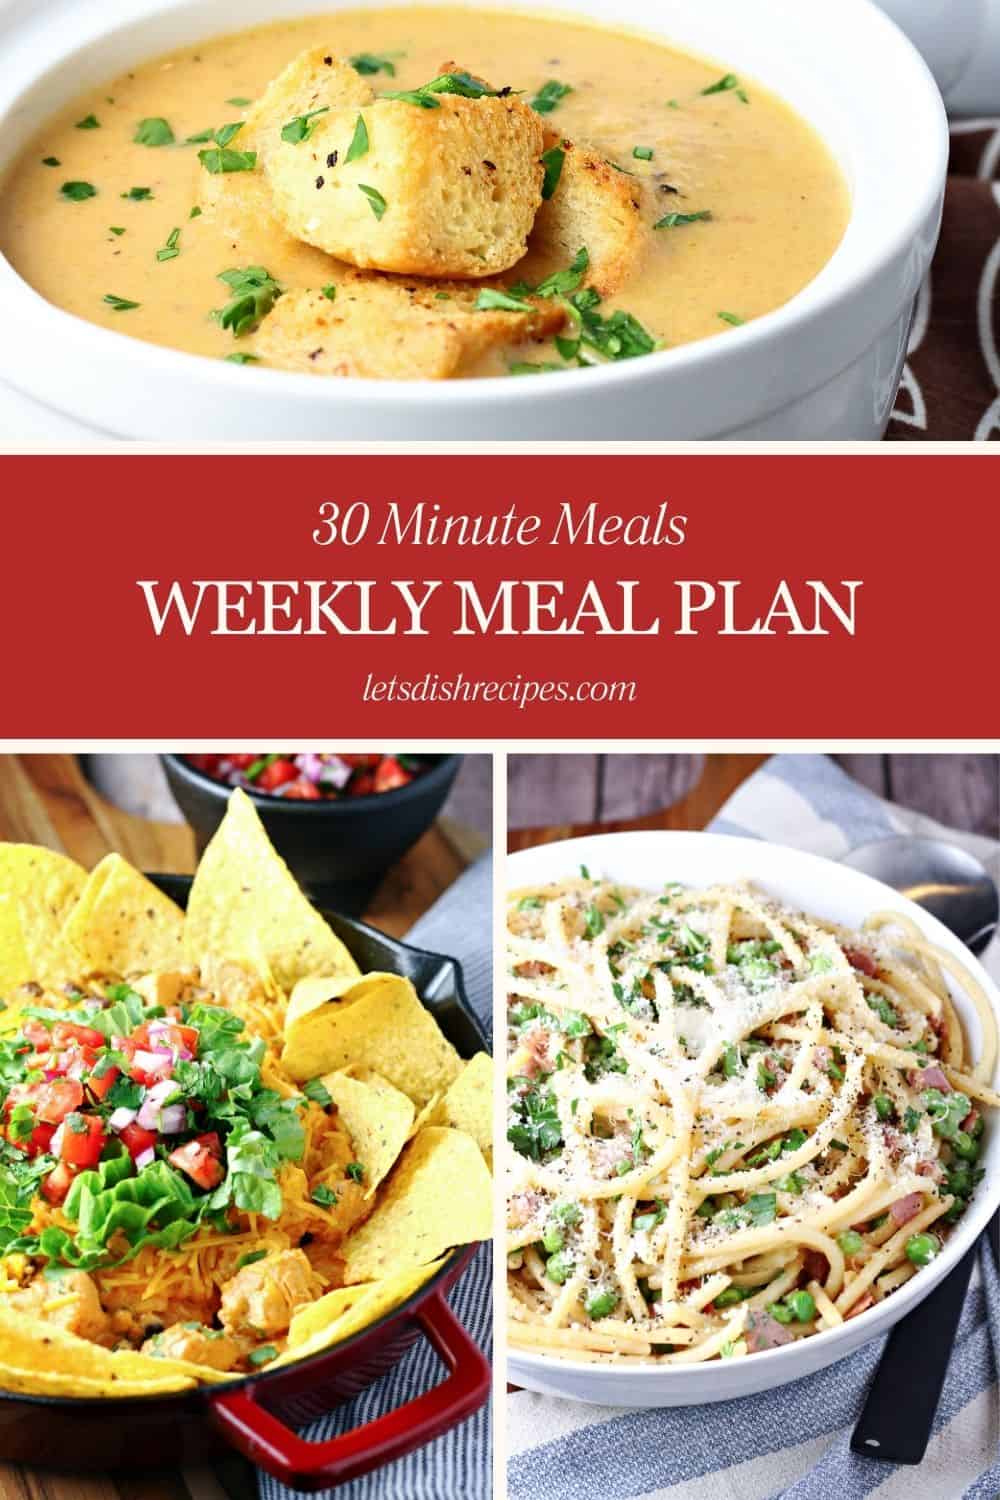 30 Minute Meal Plan – 1 — Let's Dish Recipes